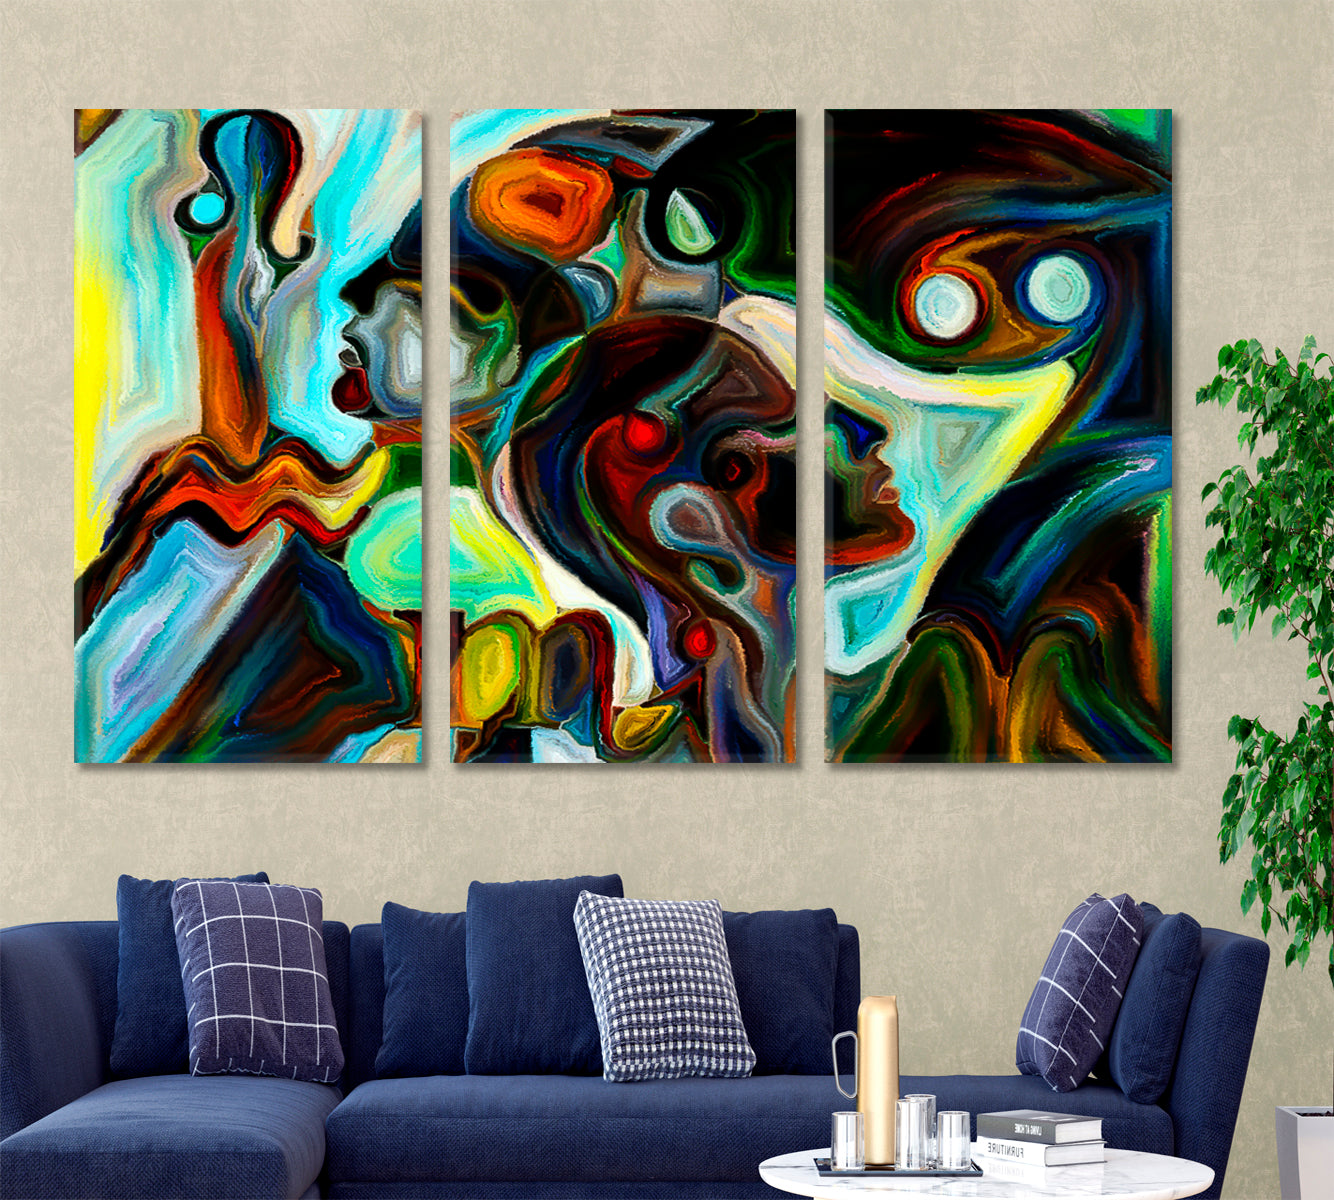 Human Symbols and Color Patterns Contemporary Art Artesty 3 panels 36" x 24" 